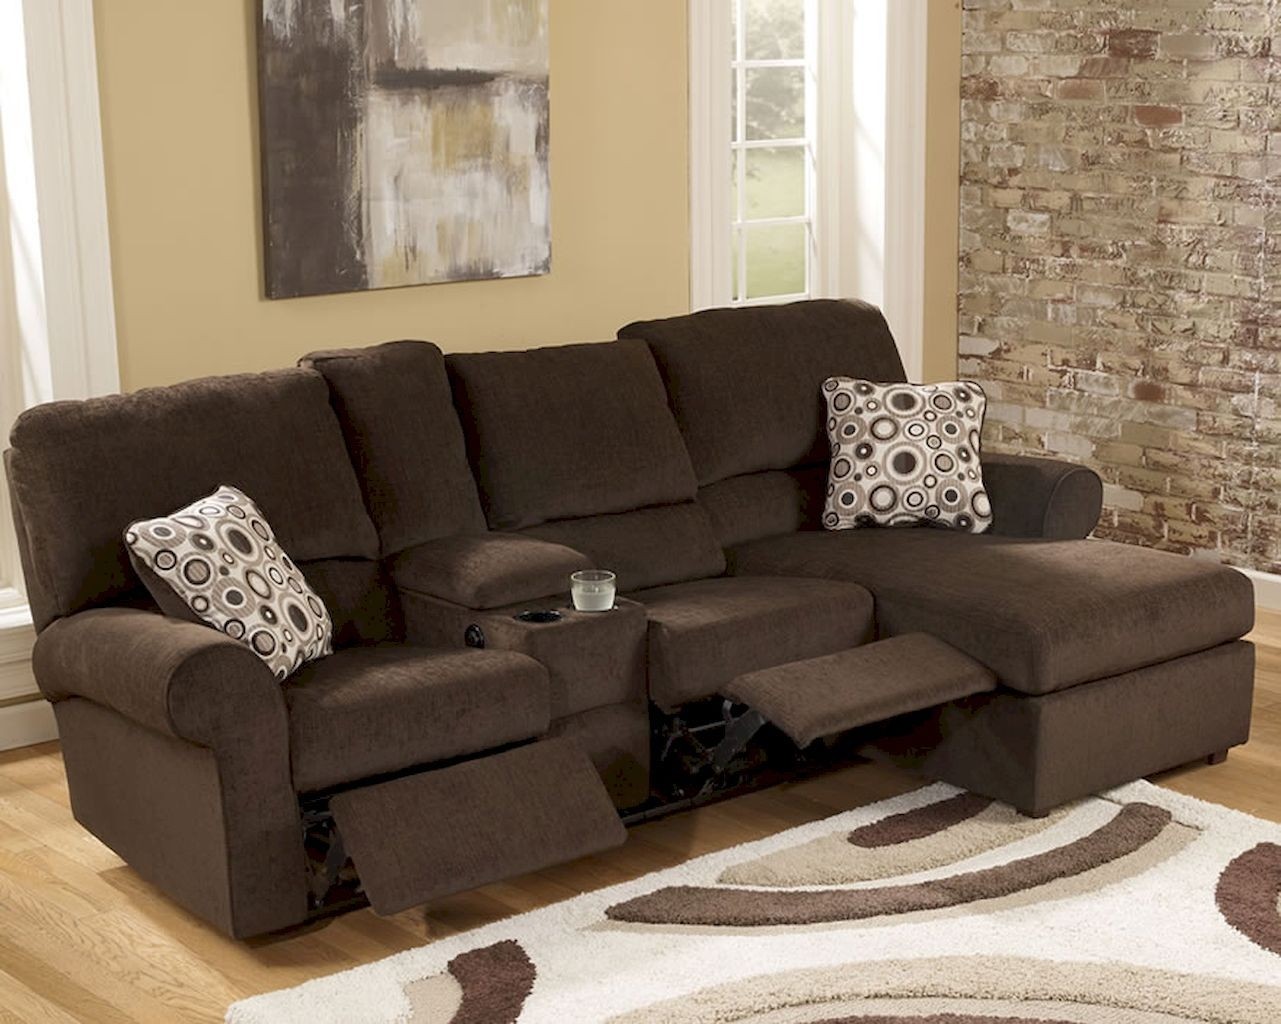 Leather sectionals for small spaces